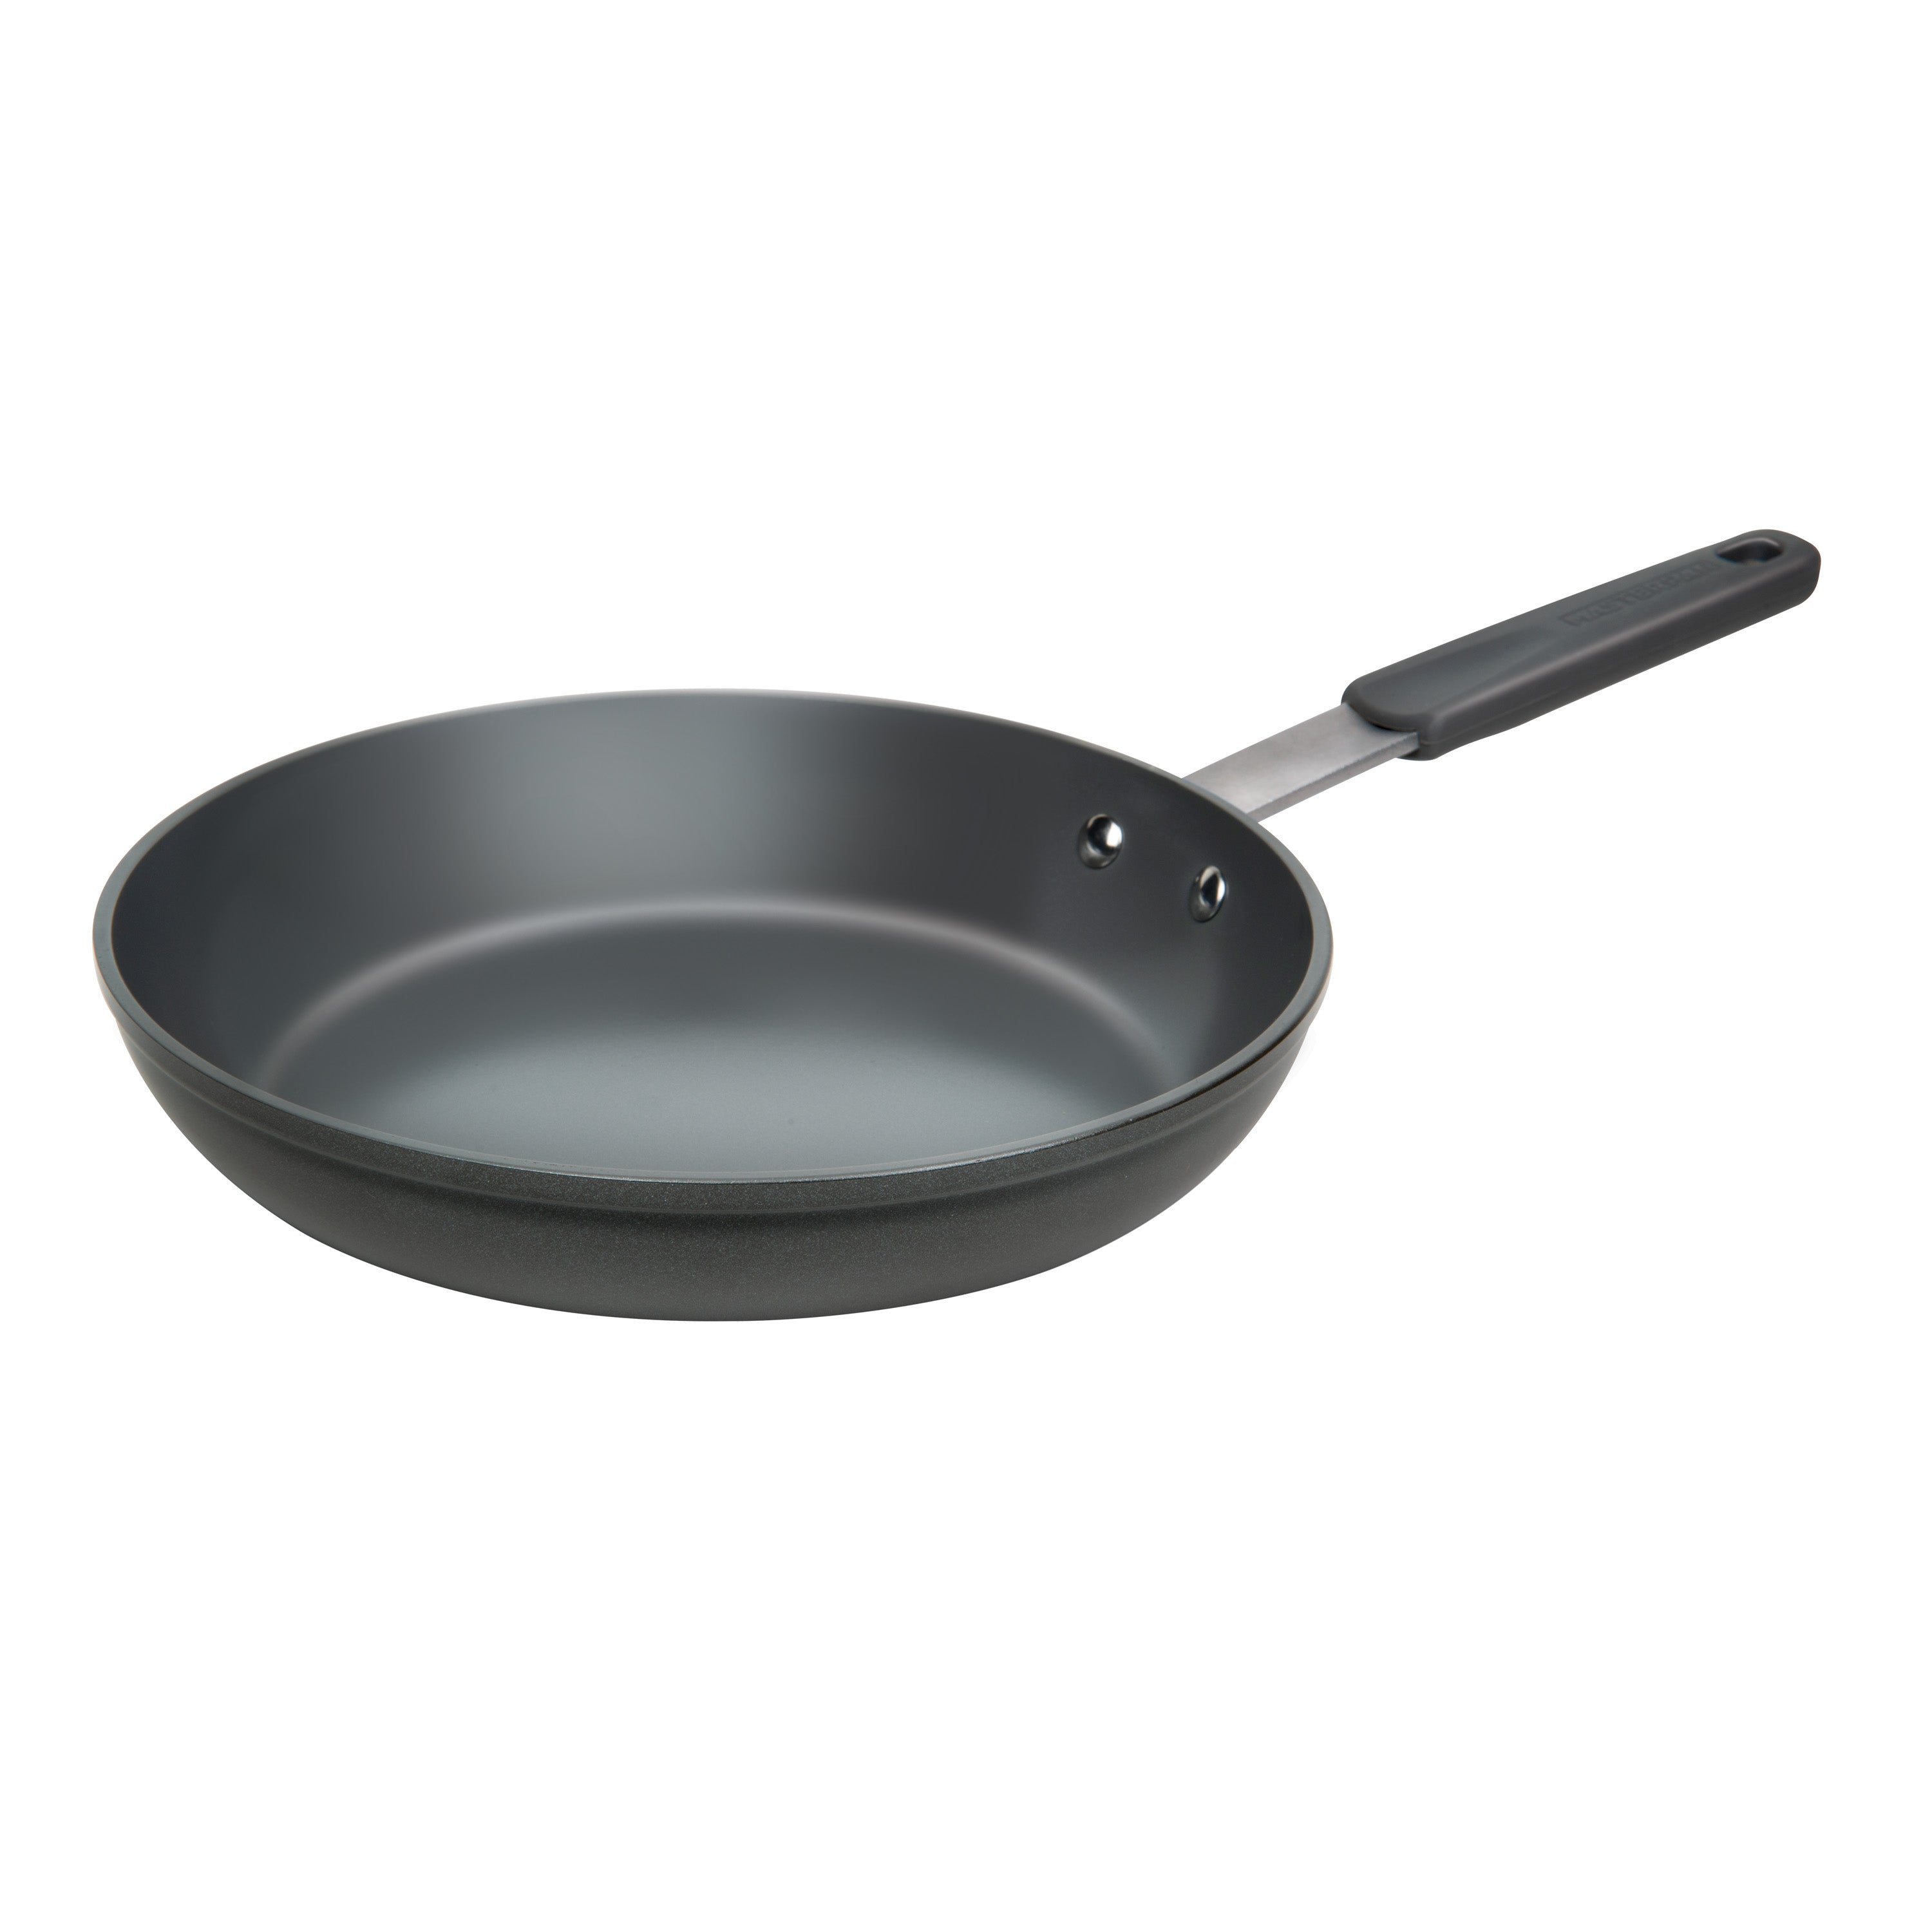 MASTERPAN Ceramic Nonstick Frypan & Skillet with Chefs Handle, 11